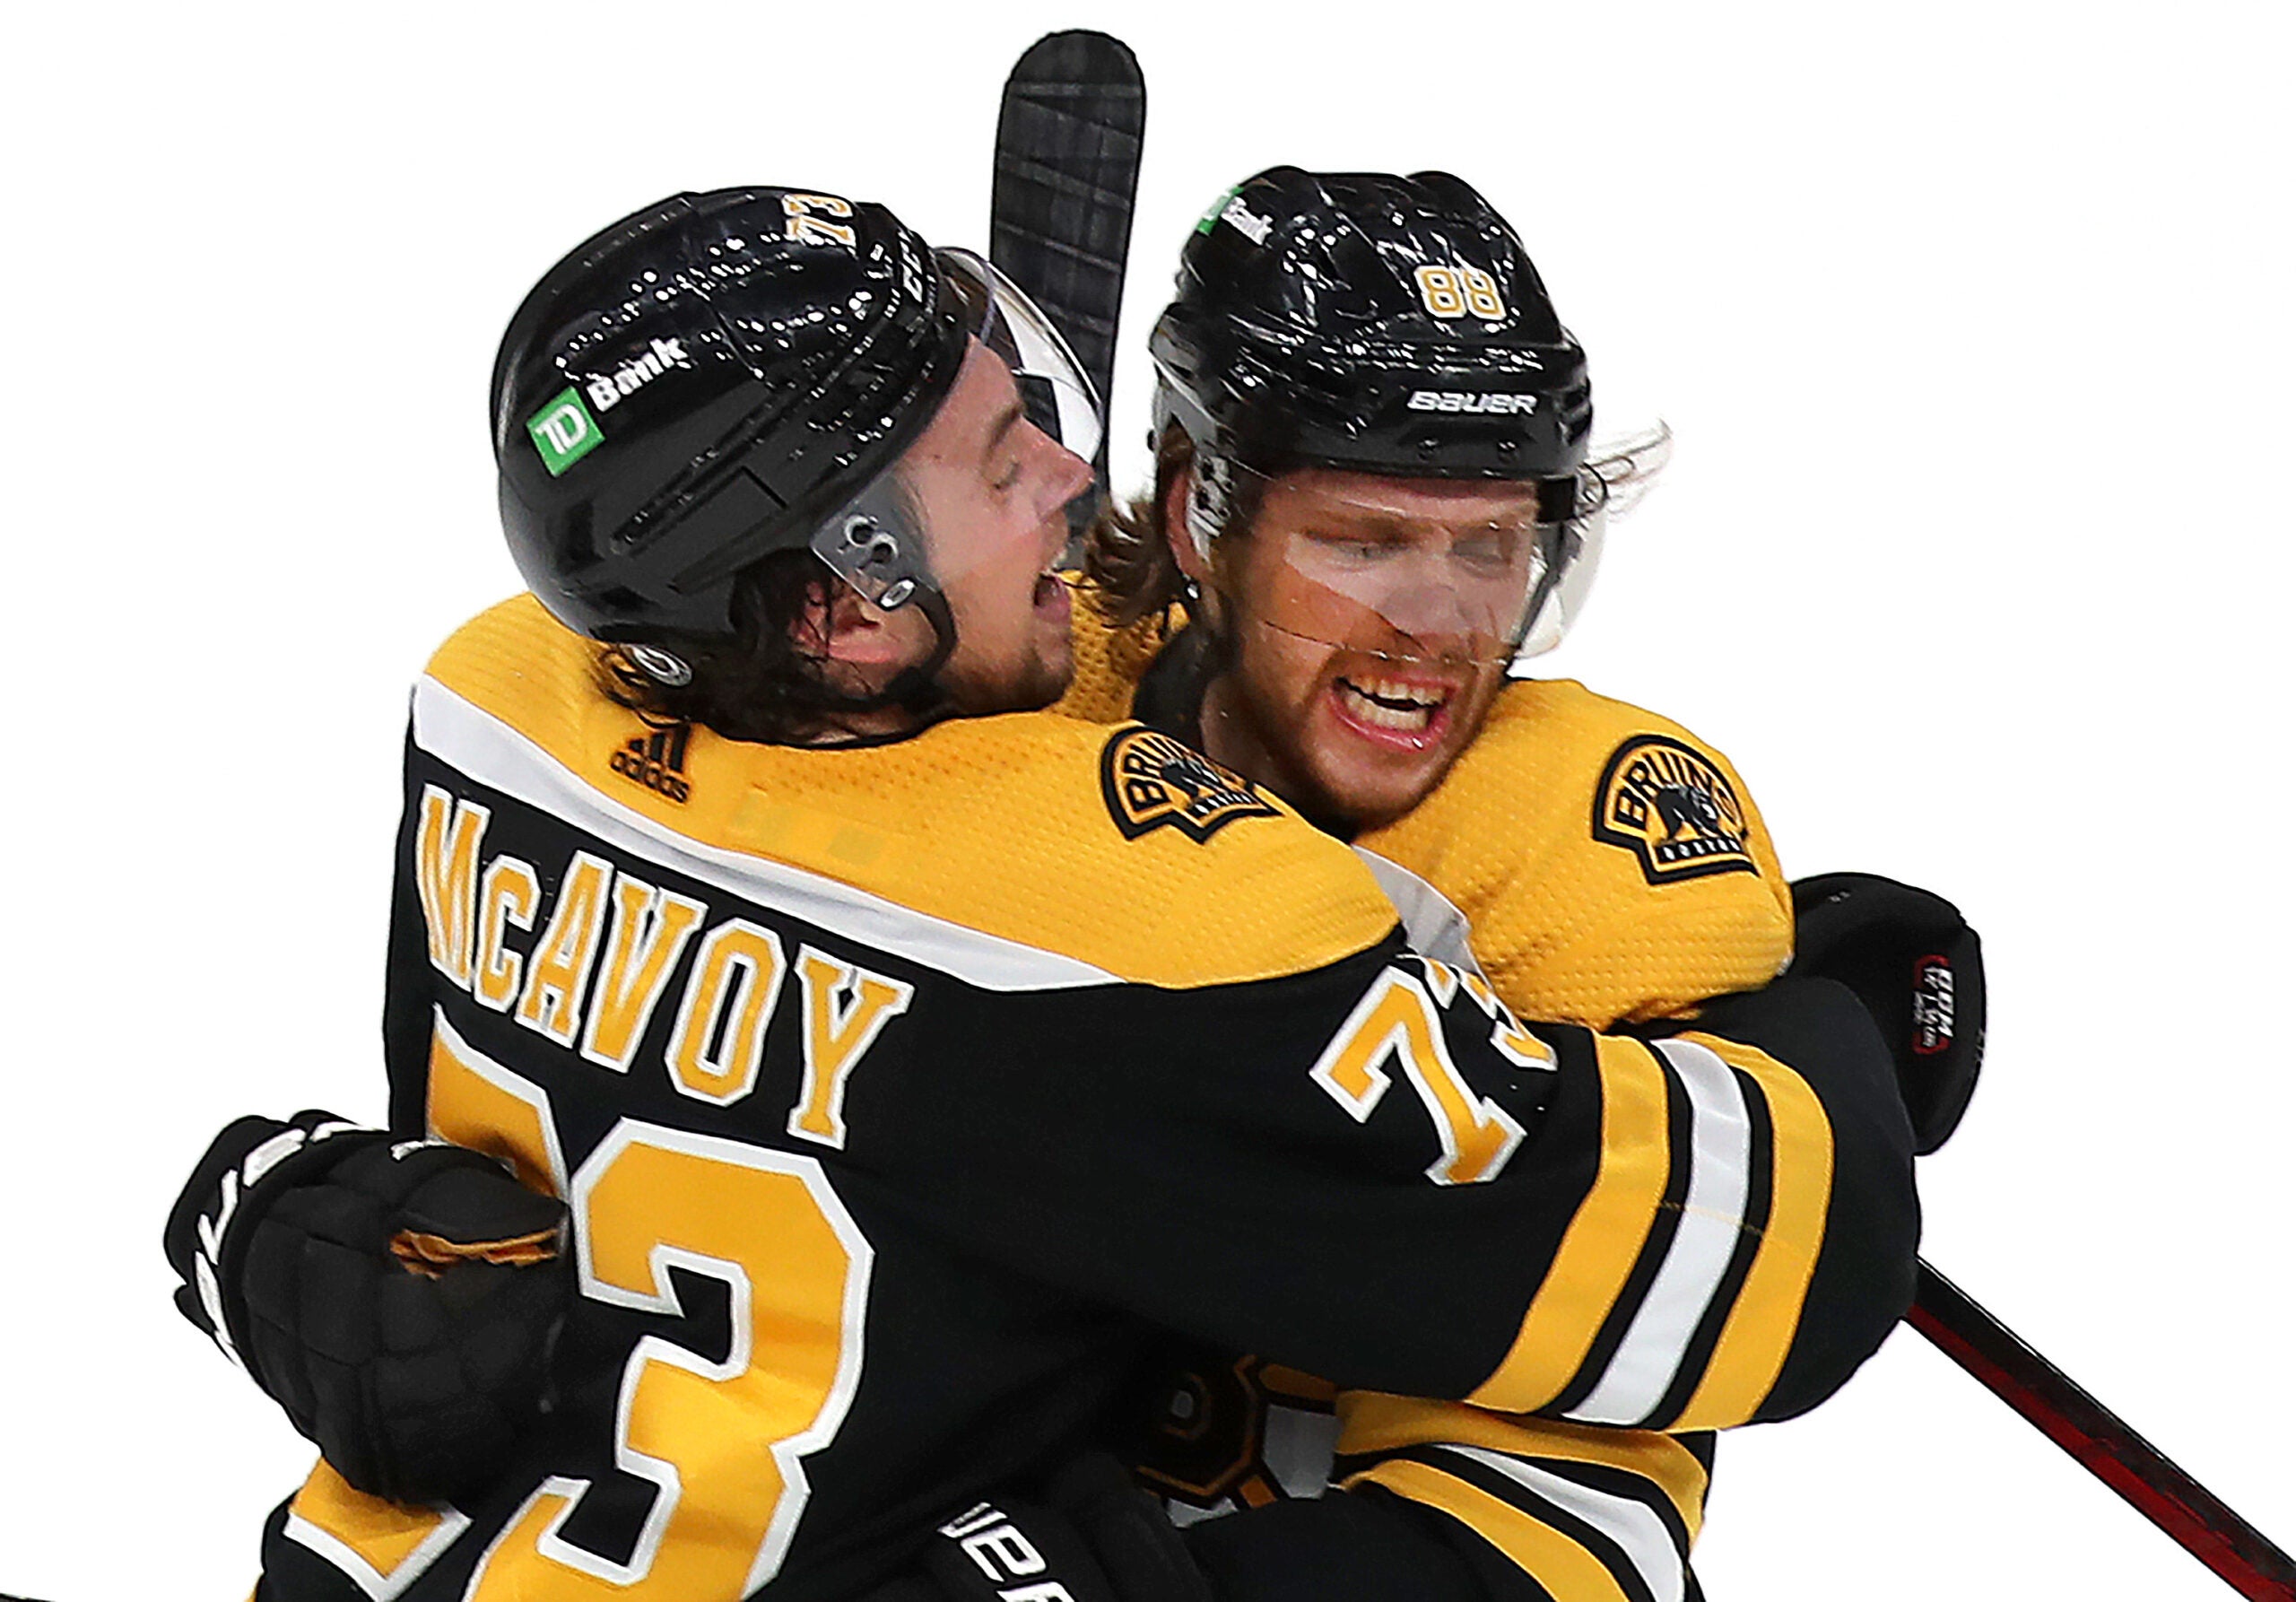 It Felt Amazing What David Pastrnak Said About Scoring A Hat Trick In The Bruins Game 1 Win Over The Islanders